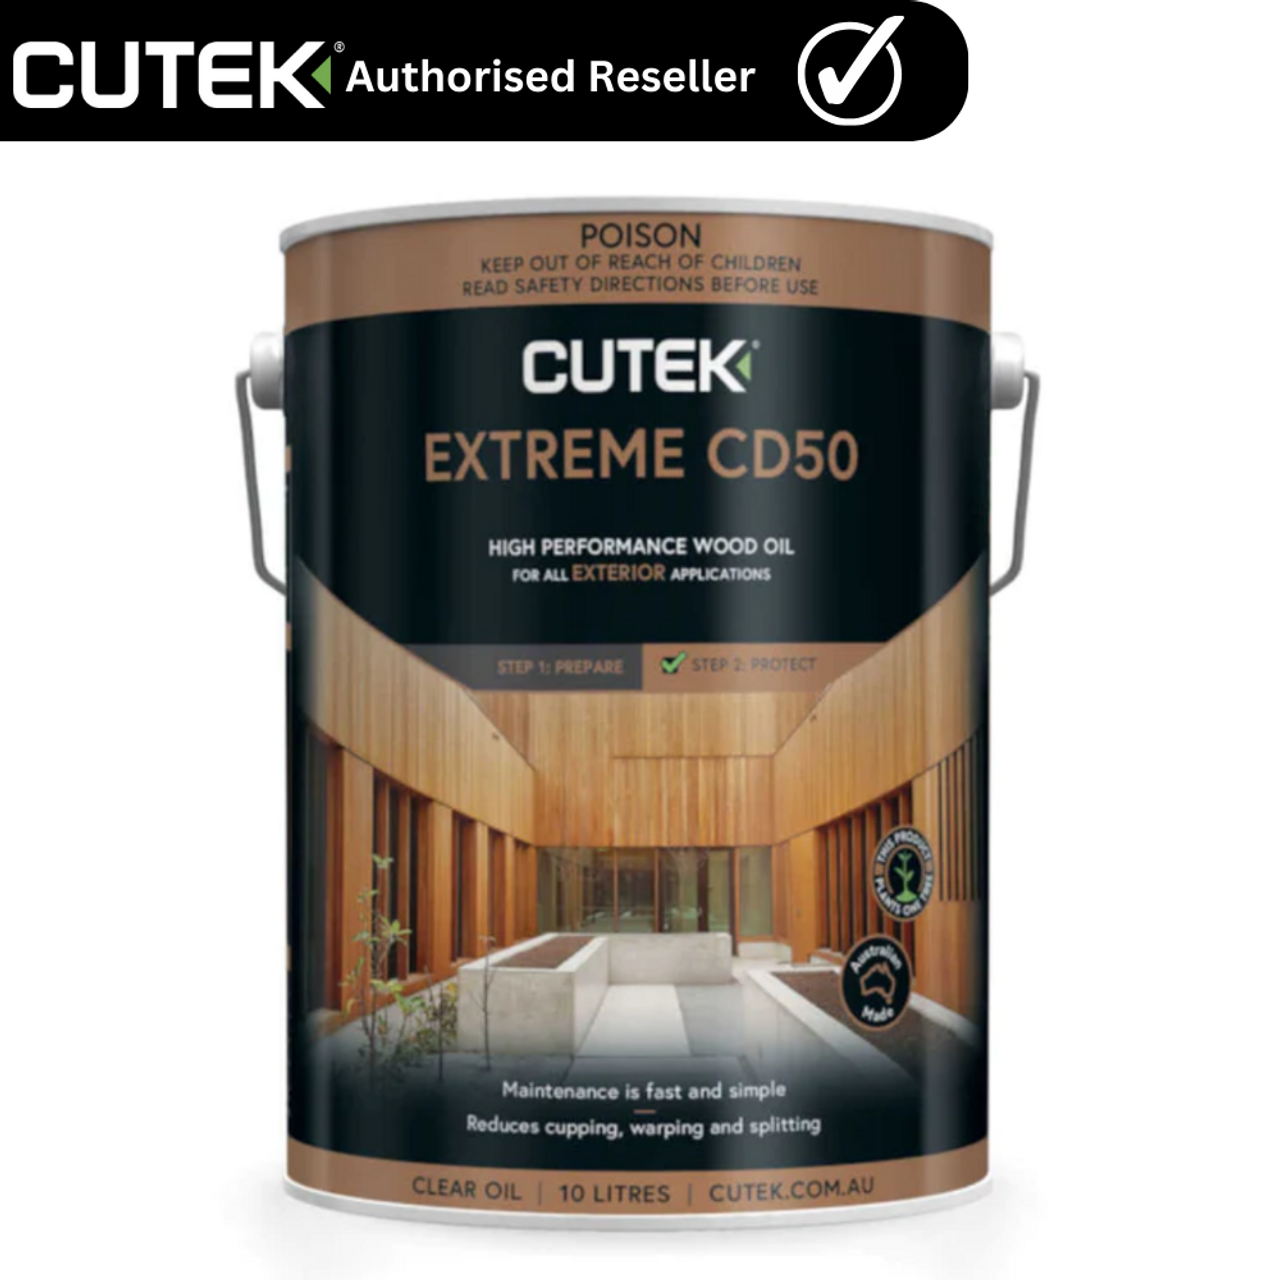 CUTEK Outdoor Oils  CD50 Extreme with  for CUTEK Outdoor Oils | CD50 Extreme Clear Decking Outdoor Oils  in 10L Can that have  available in Australia and New Zealand